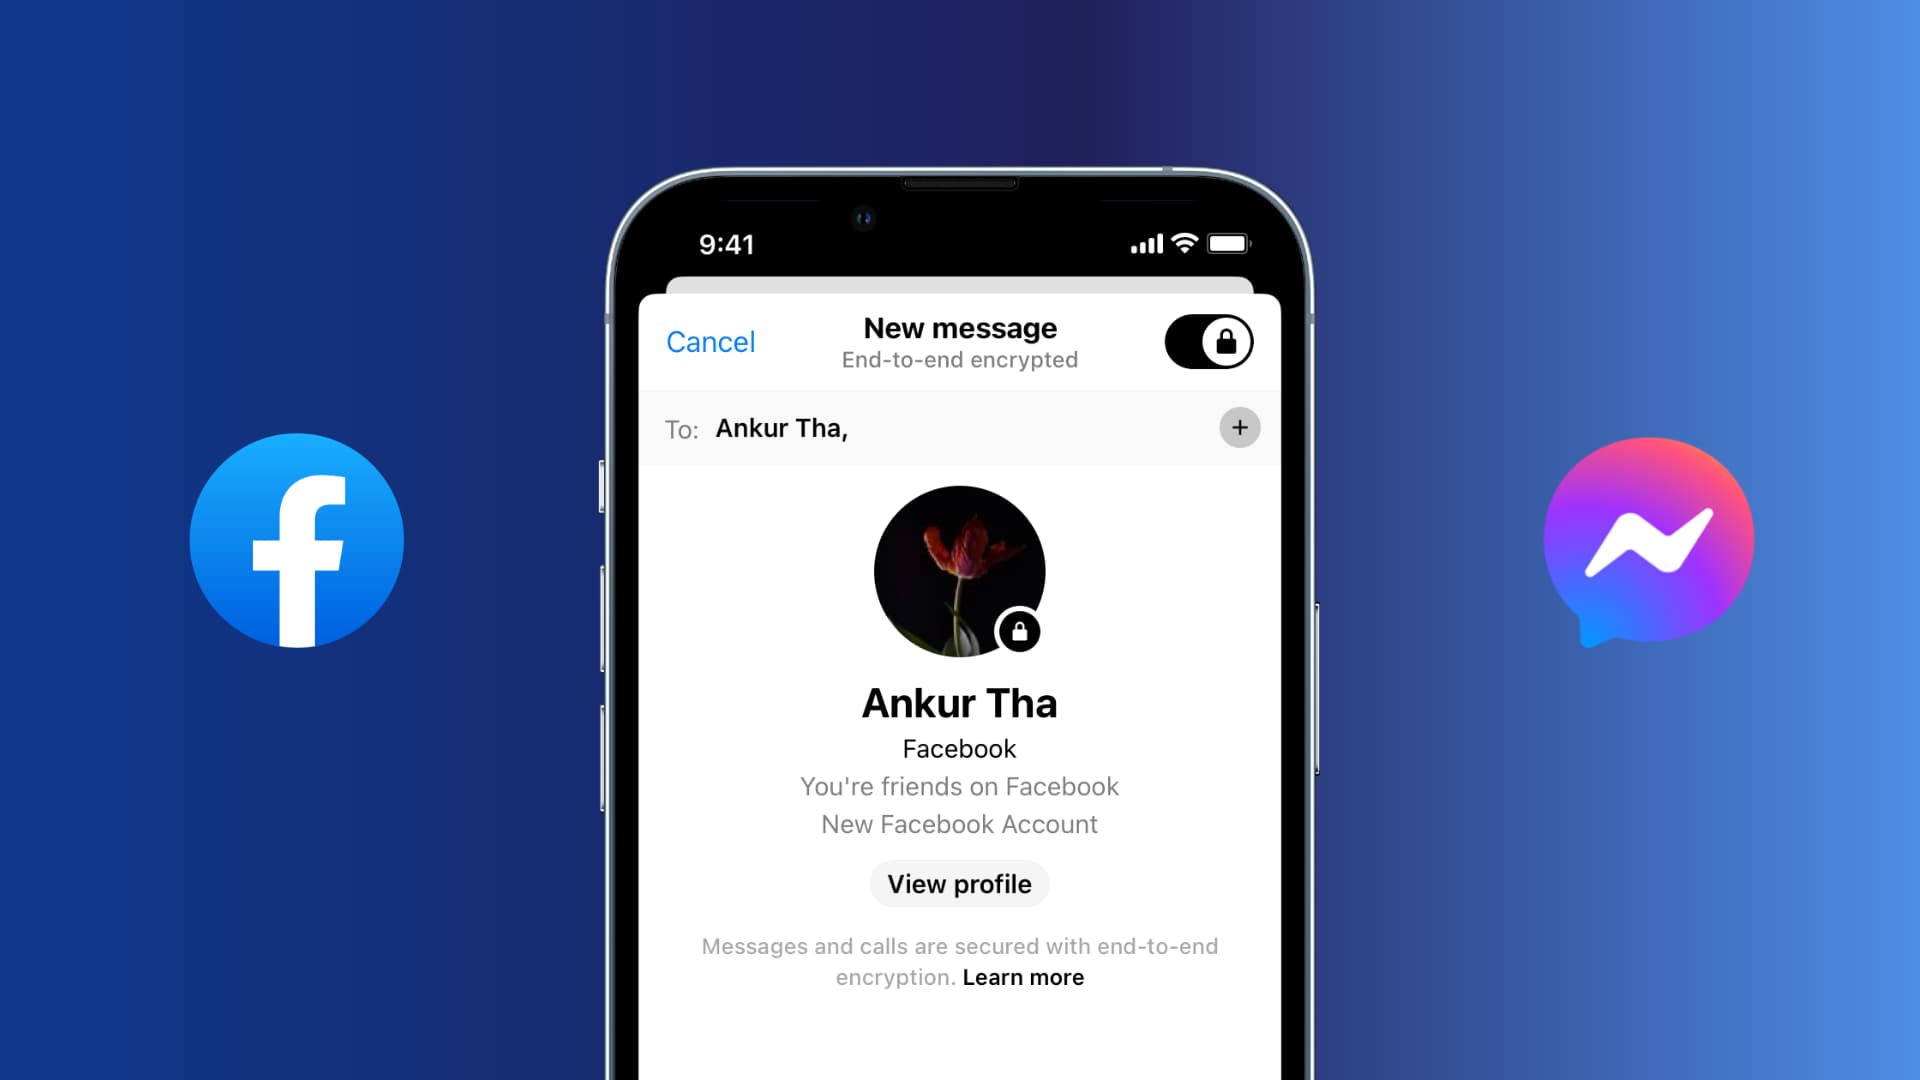 iPhone screen showing Facebook Messenger app with an encrypted secret conversation